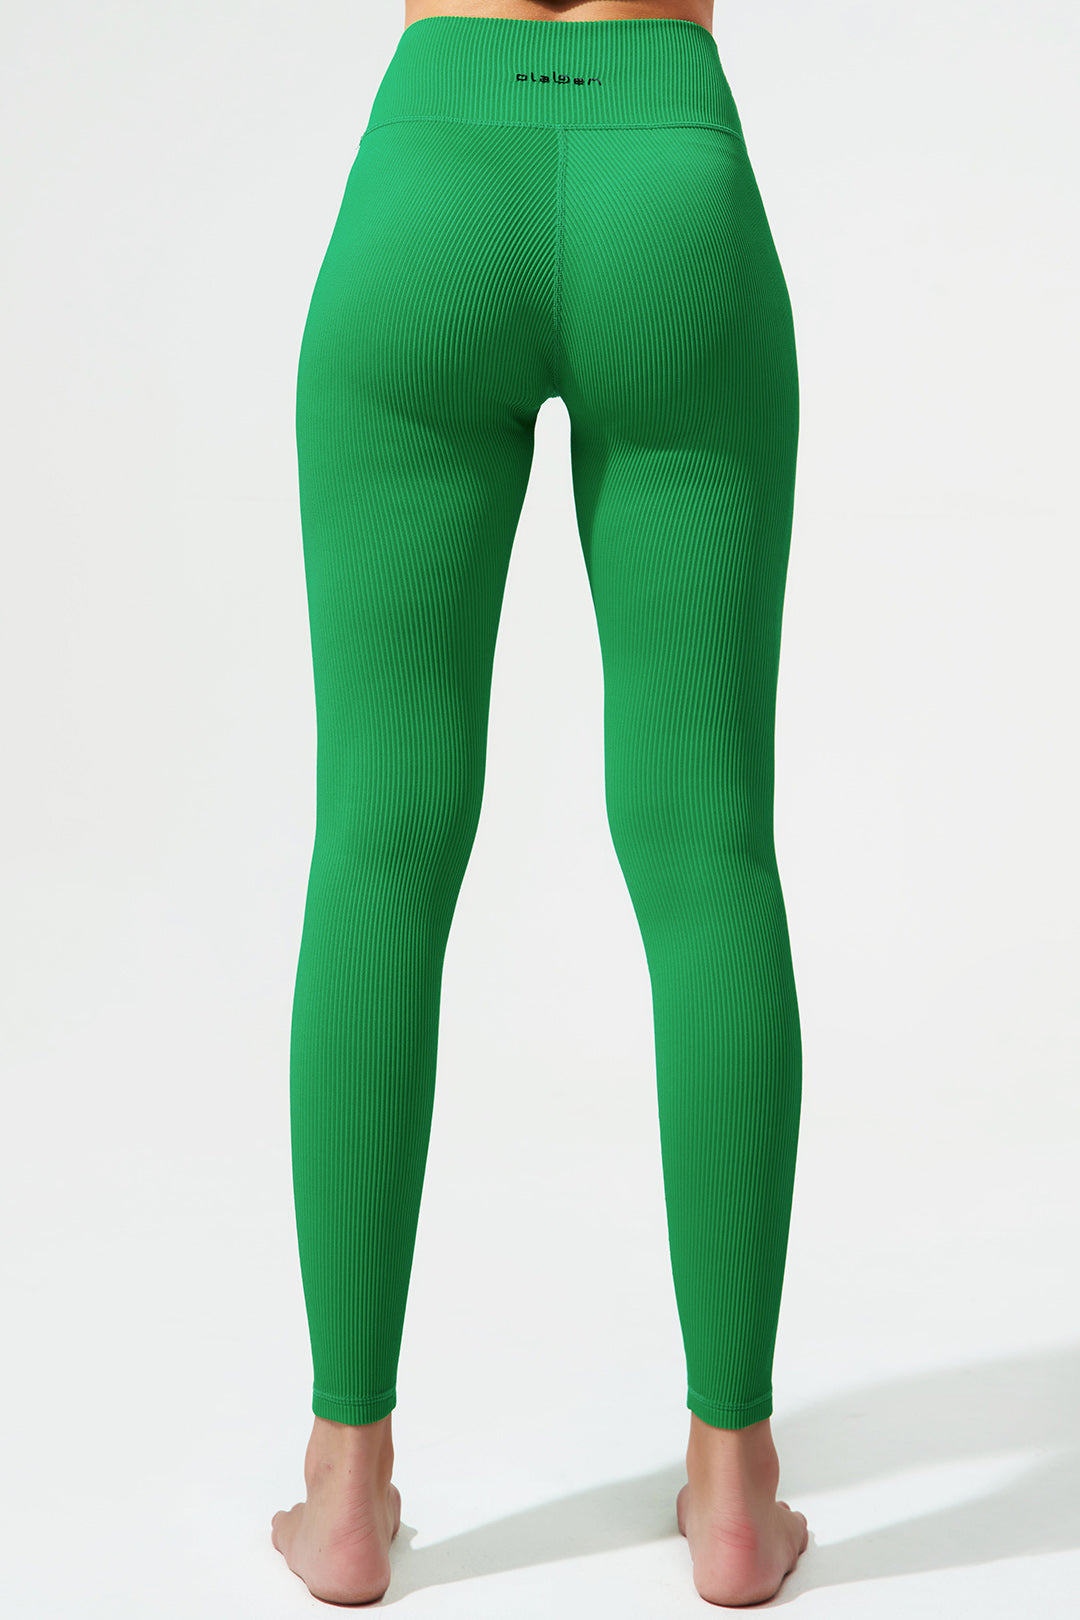 Querida high-waist fern green leggings for women, a stylish and comfortable choice for any occasion.